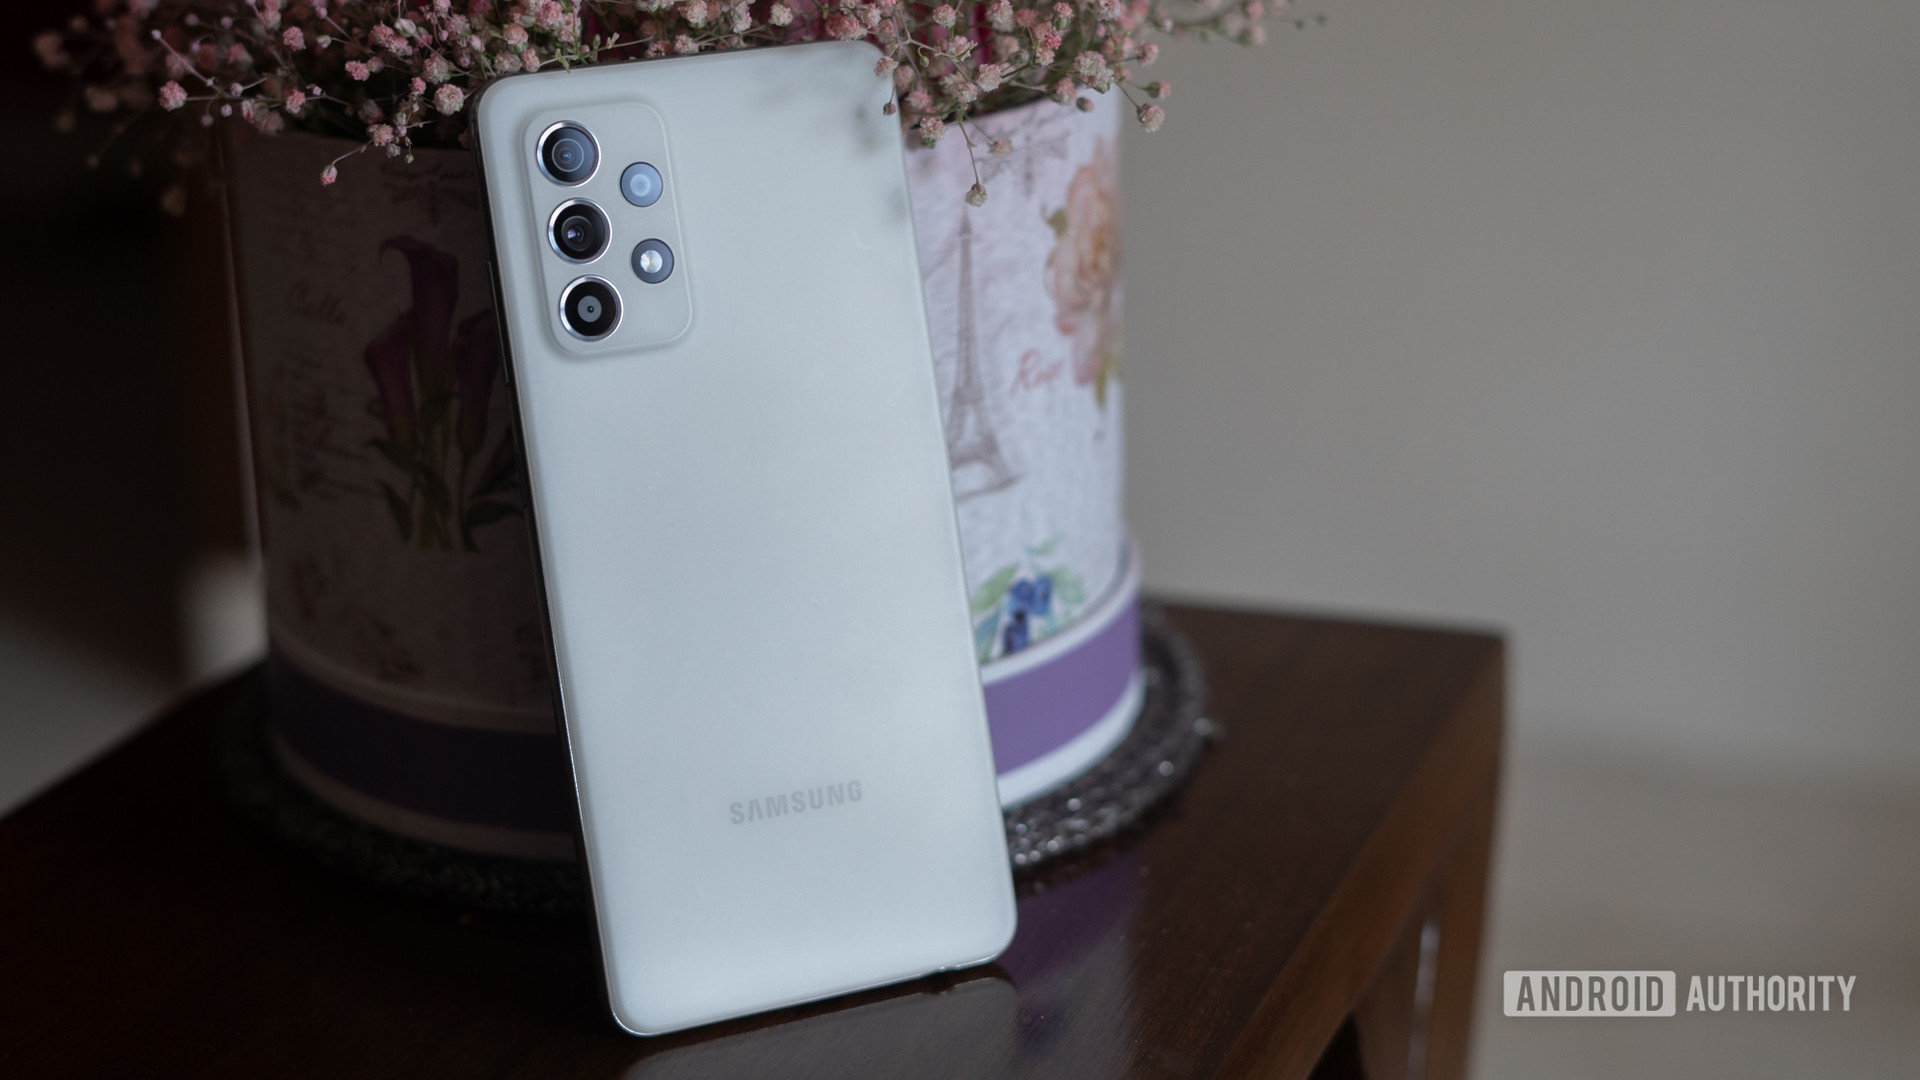 Samsung Galaxy A52s 5G angled up against flower pot rear view